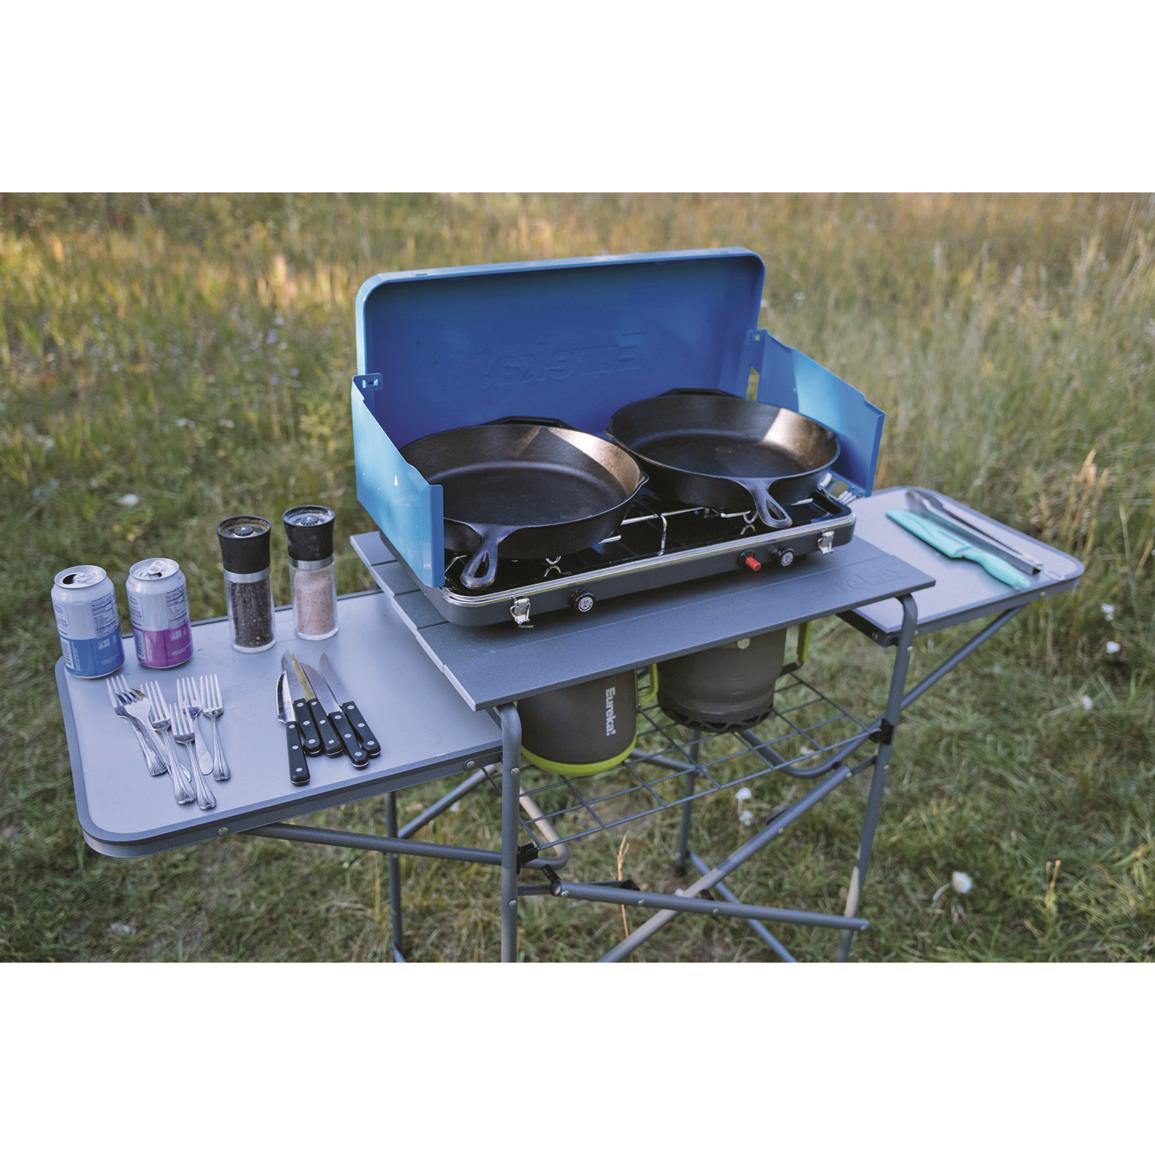 Camp Chef Cast Iron Cook Set, 6 Piece - 706020, Cast Iron at Sportsman's  Guide